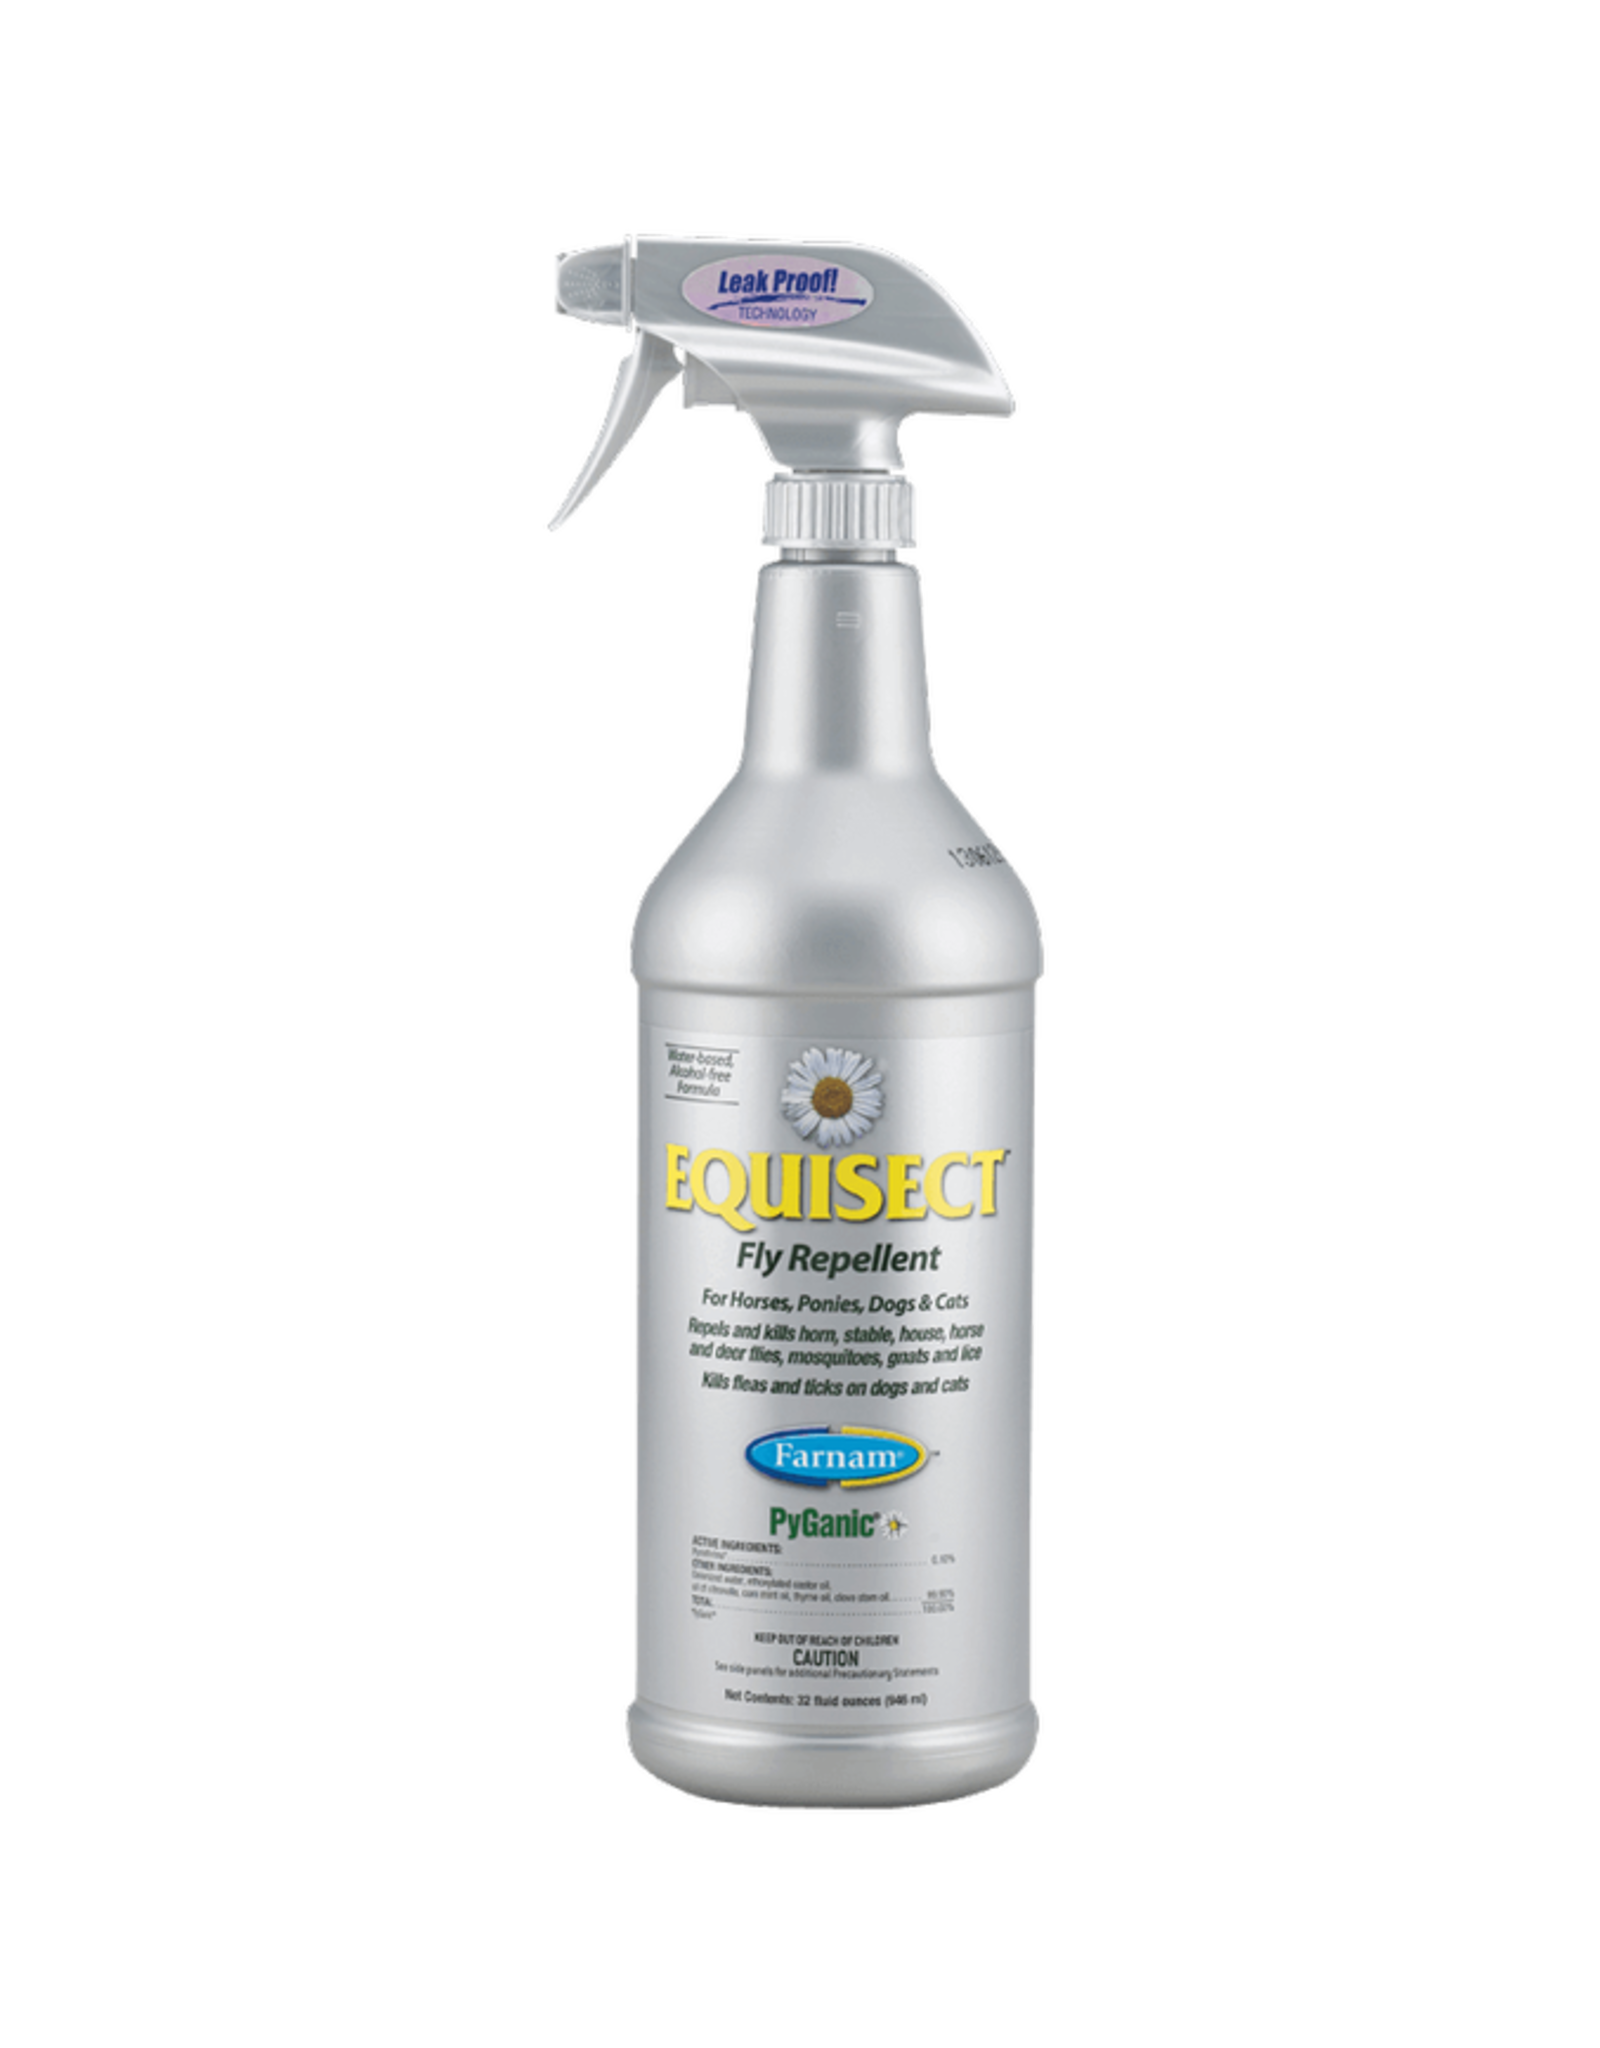 Farnam Equisect Fly Repellent - 32oz